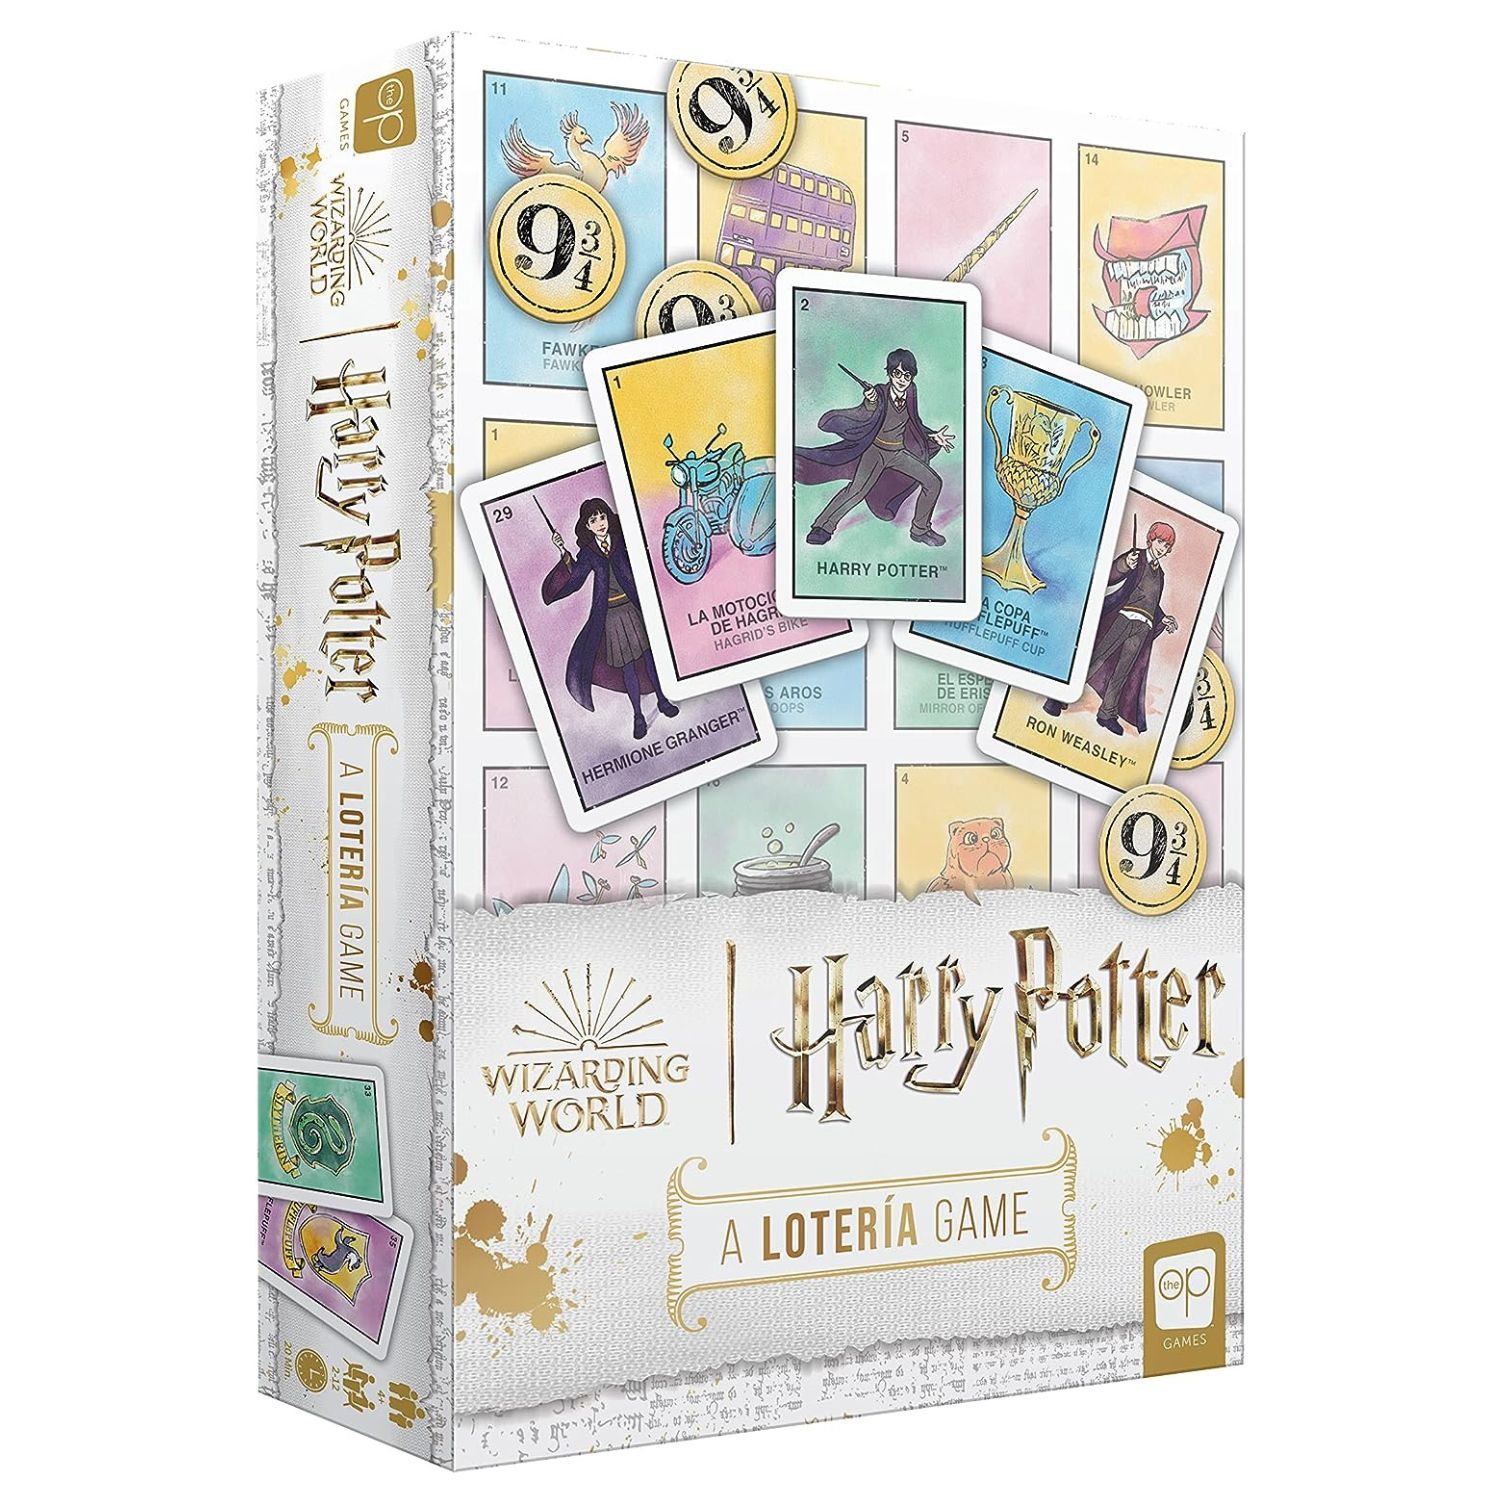 Harry Potter Loteria Mexicana game